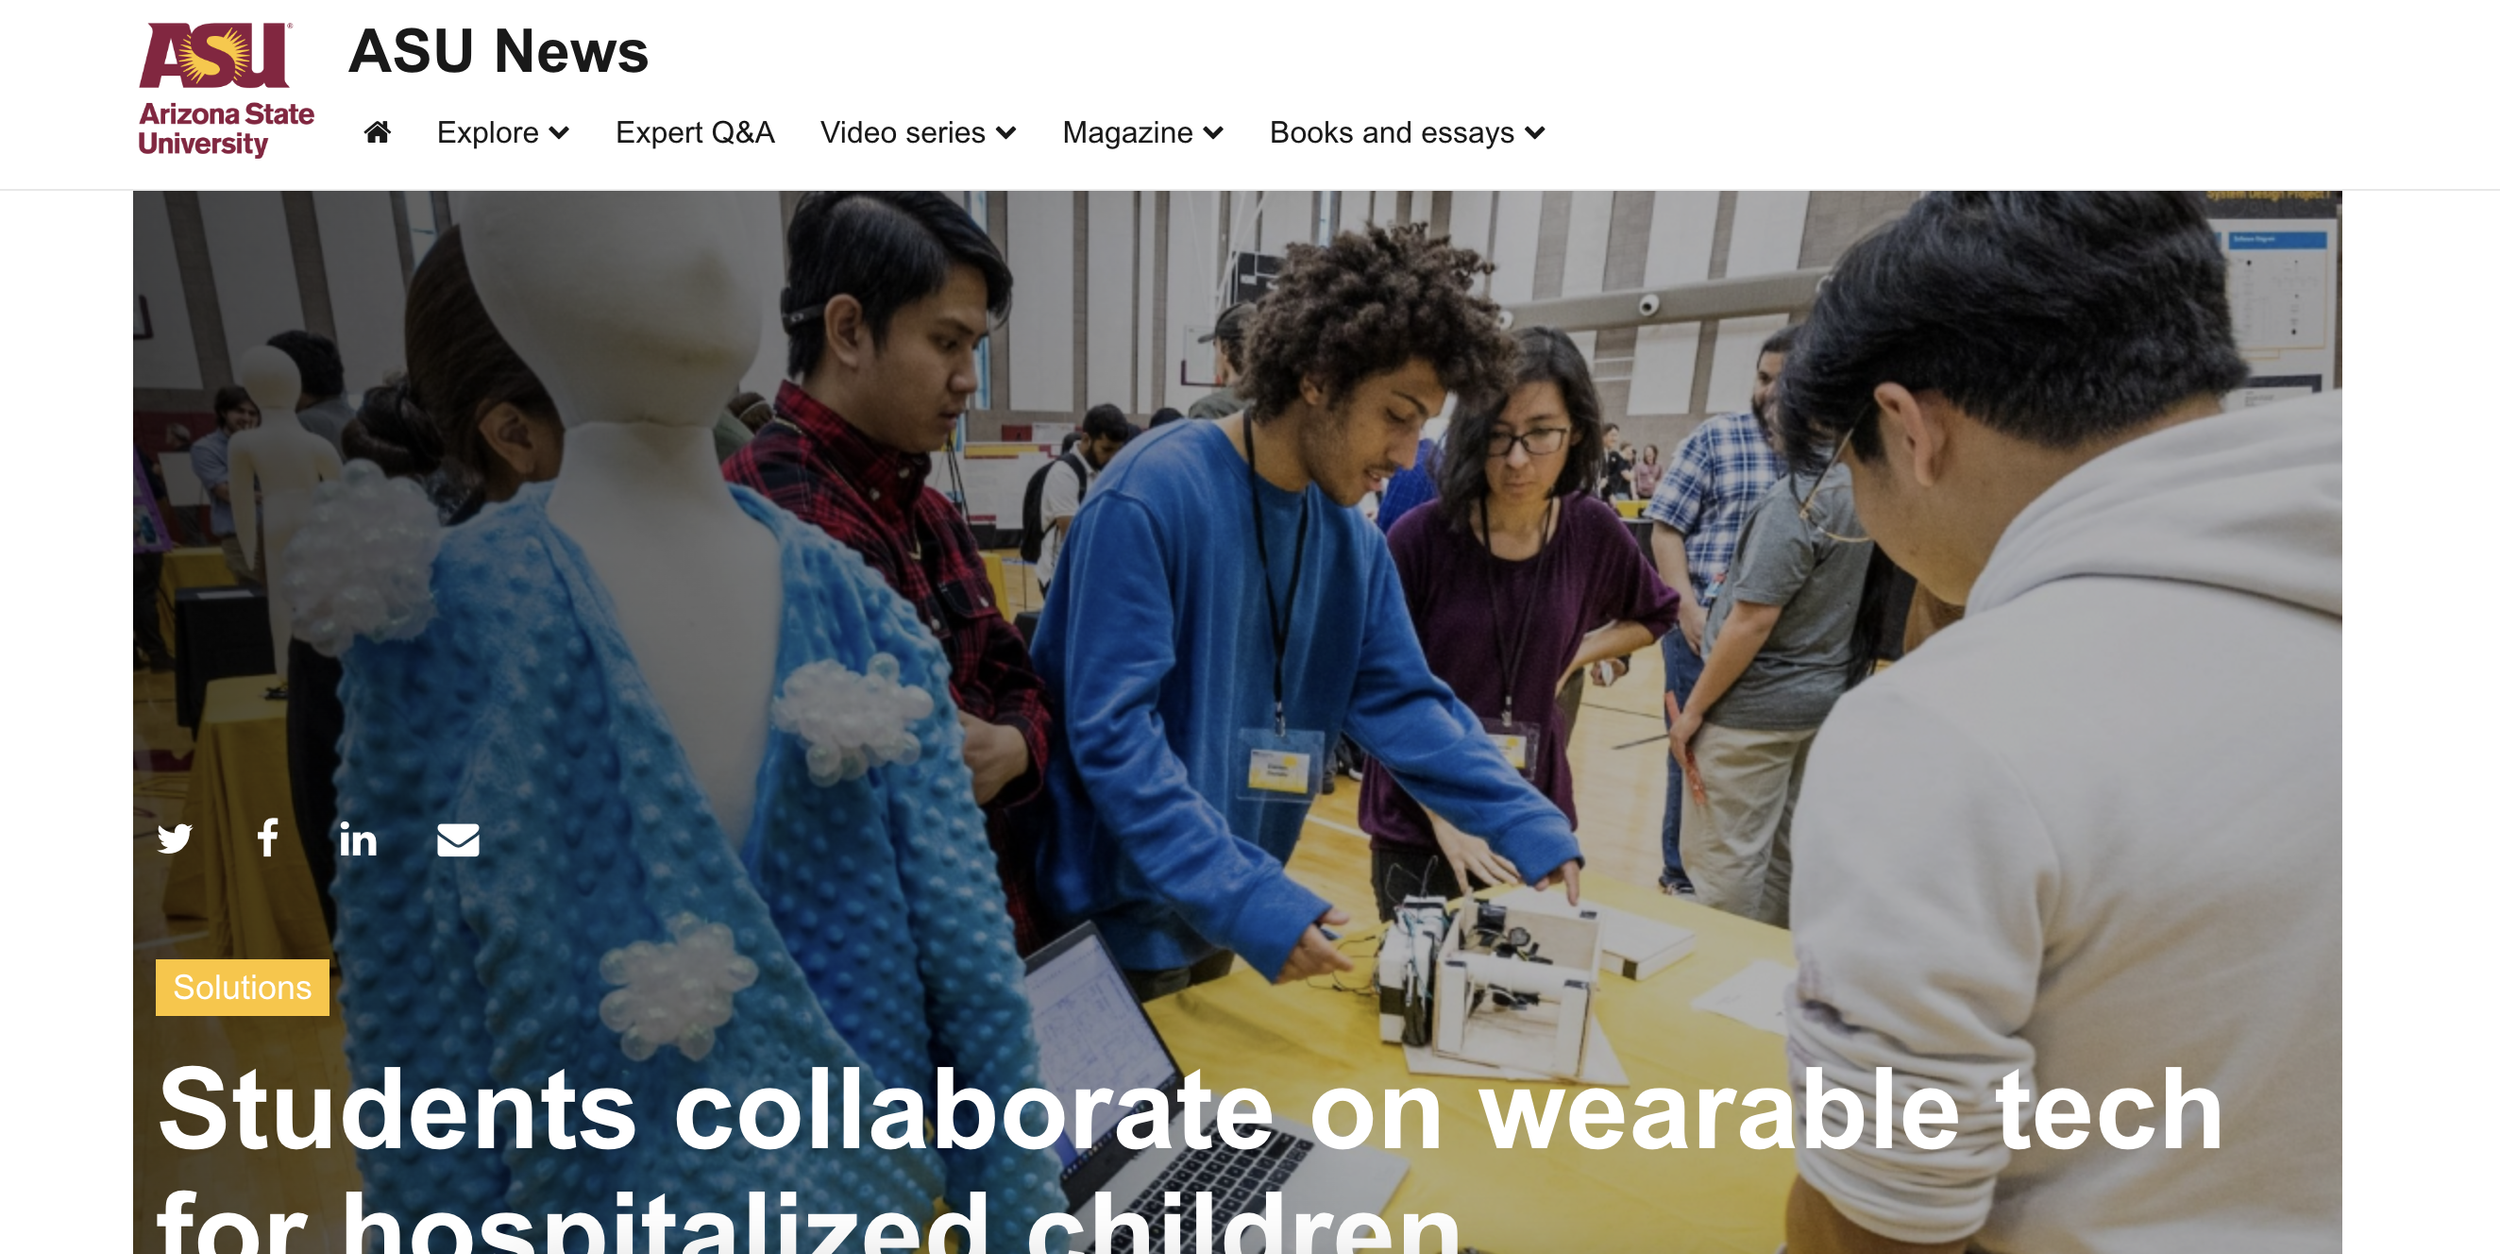 ASU News: Students collaborate on wearable tech for hospitalized children (Copy)